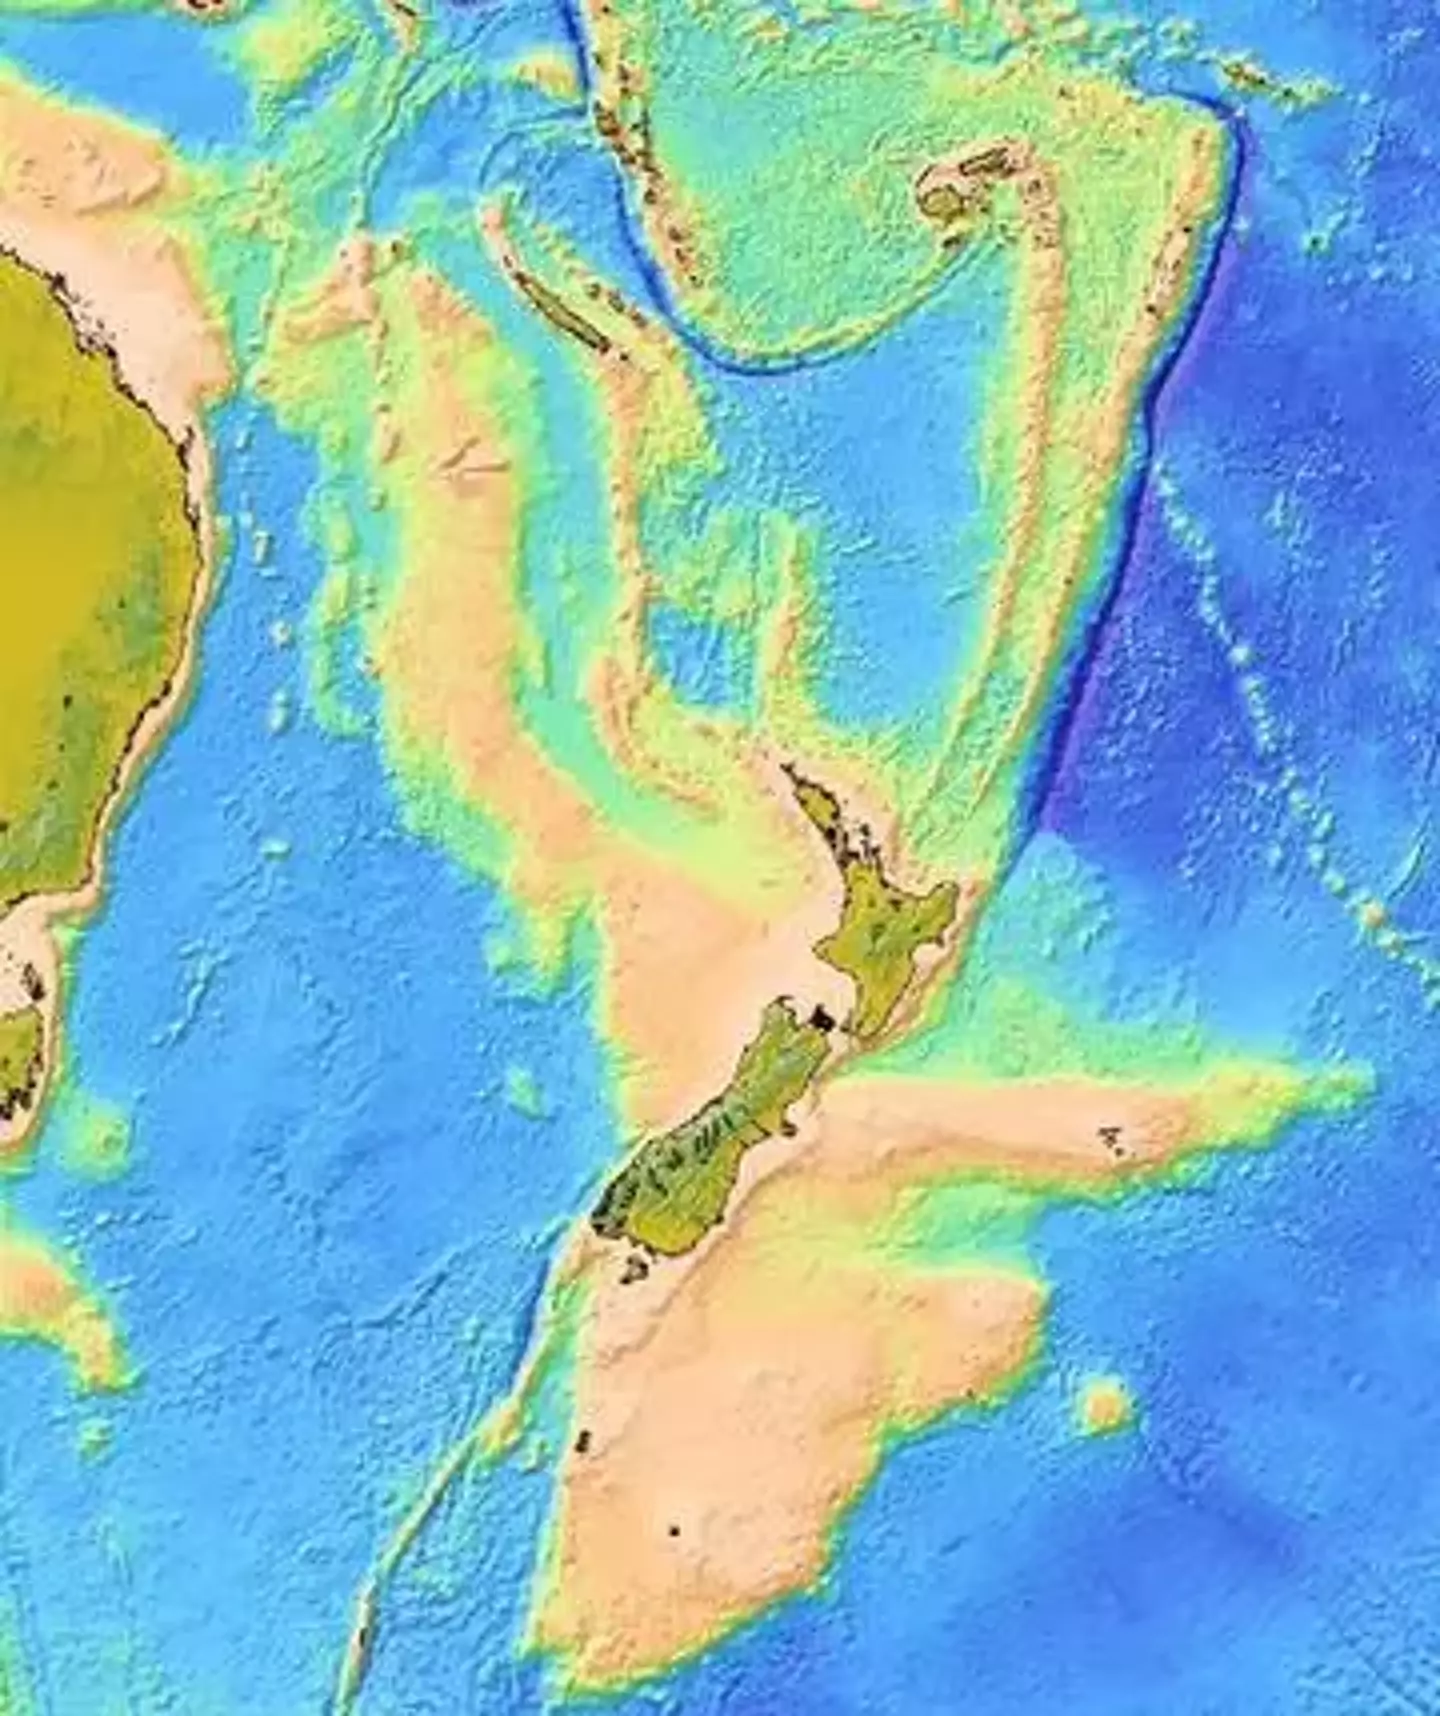 A group of scientists have been able to confirm the existence of a long lost continent that was missing for 375 years.